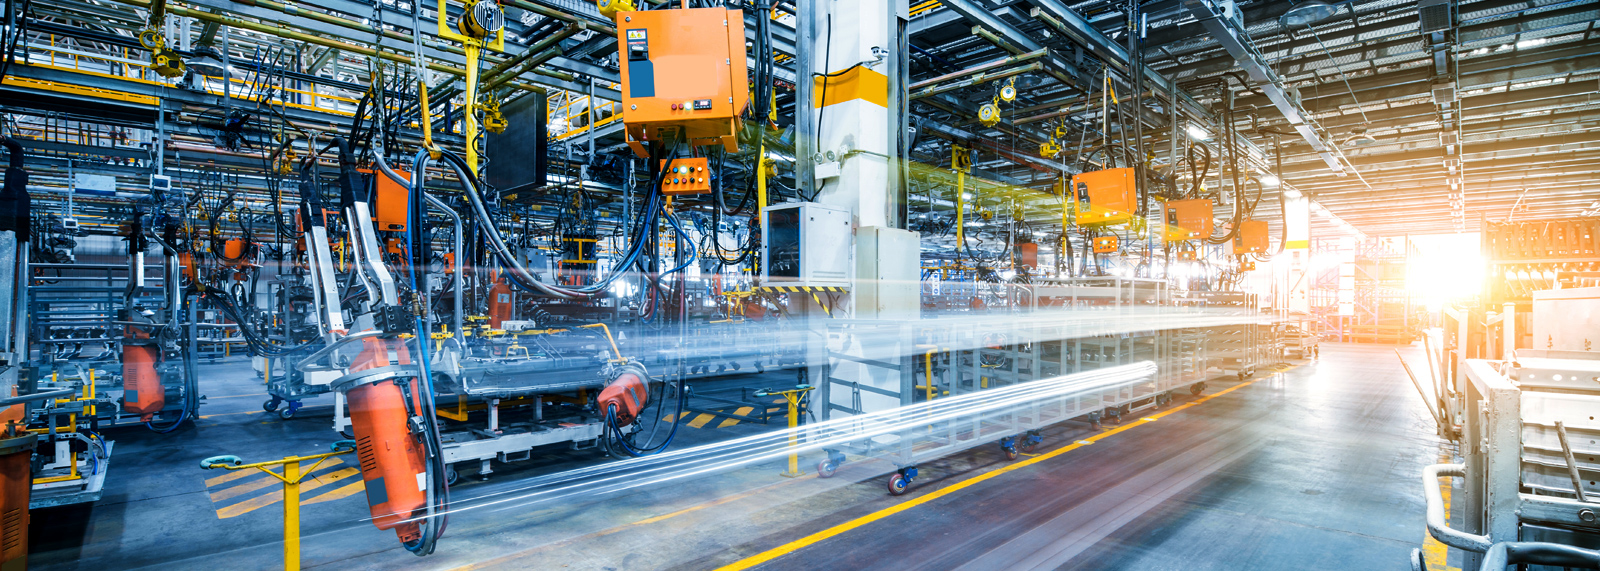 Unblocking the Digital Transformation of Your Smart Factory